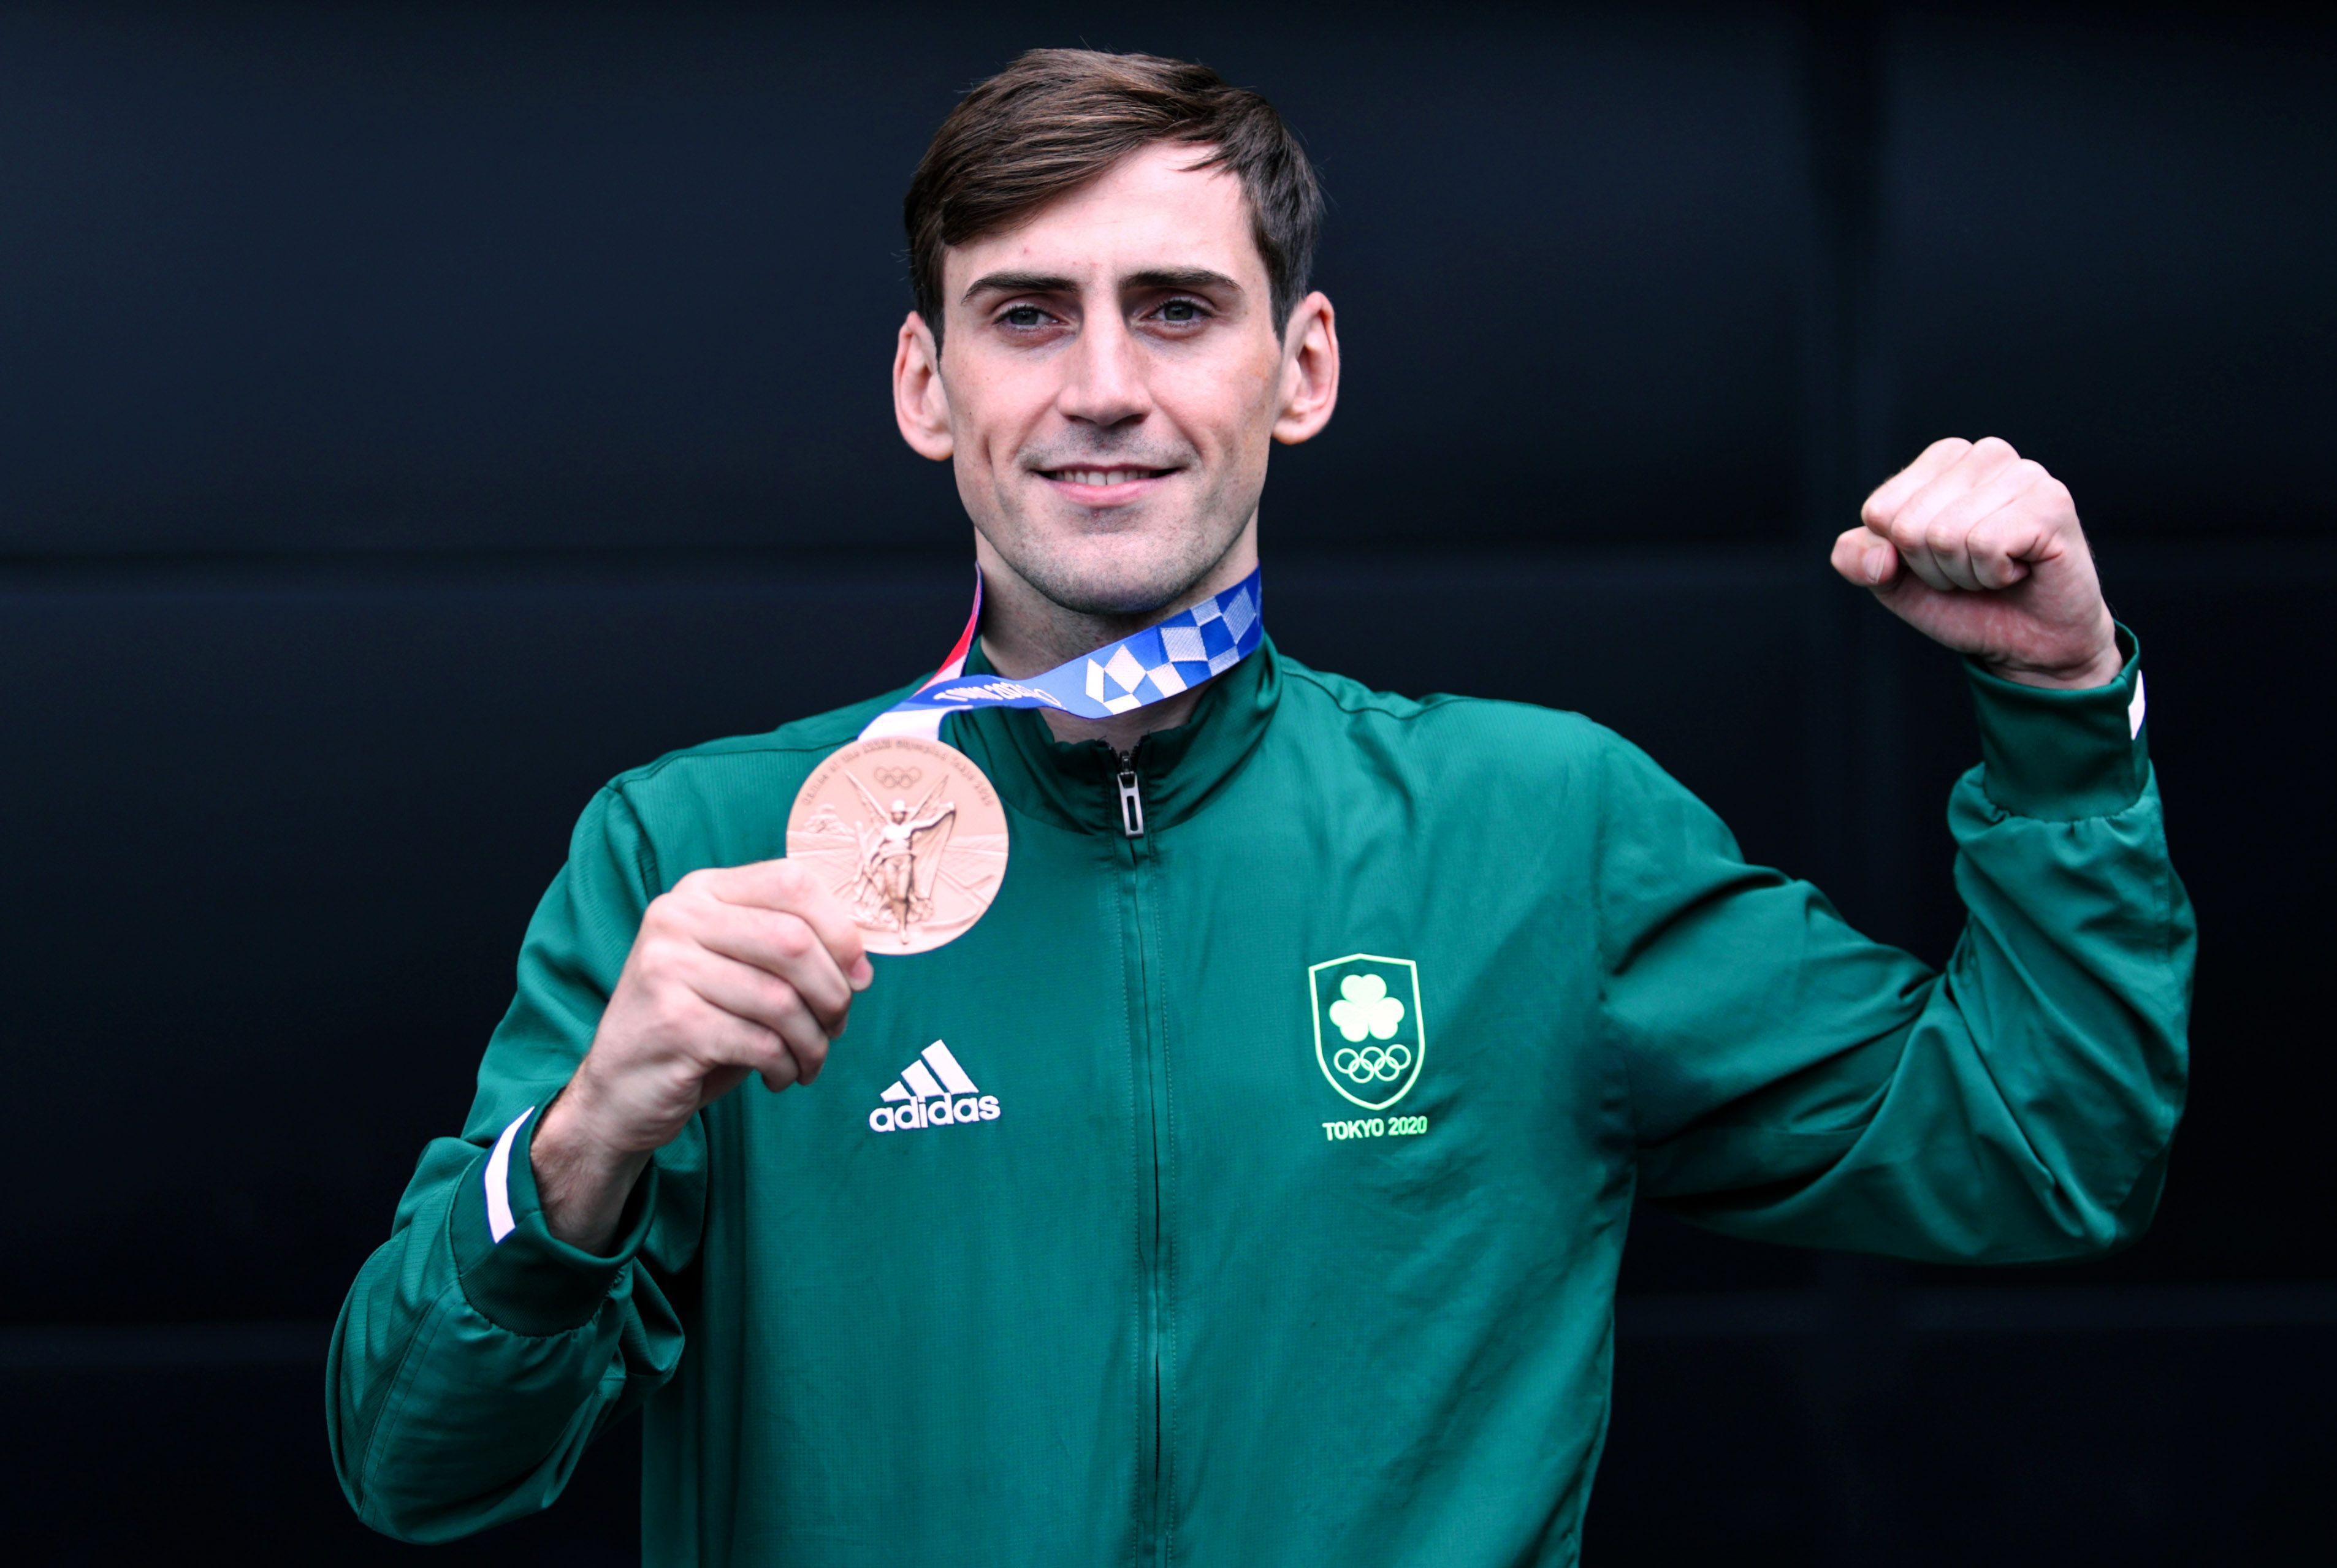 Aidan Walsh claimed bronze at the Tokyo Olympics and now has the opportunity to qualify for this summer\'s Games in Paris